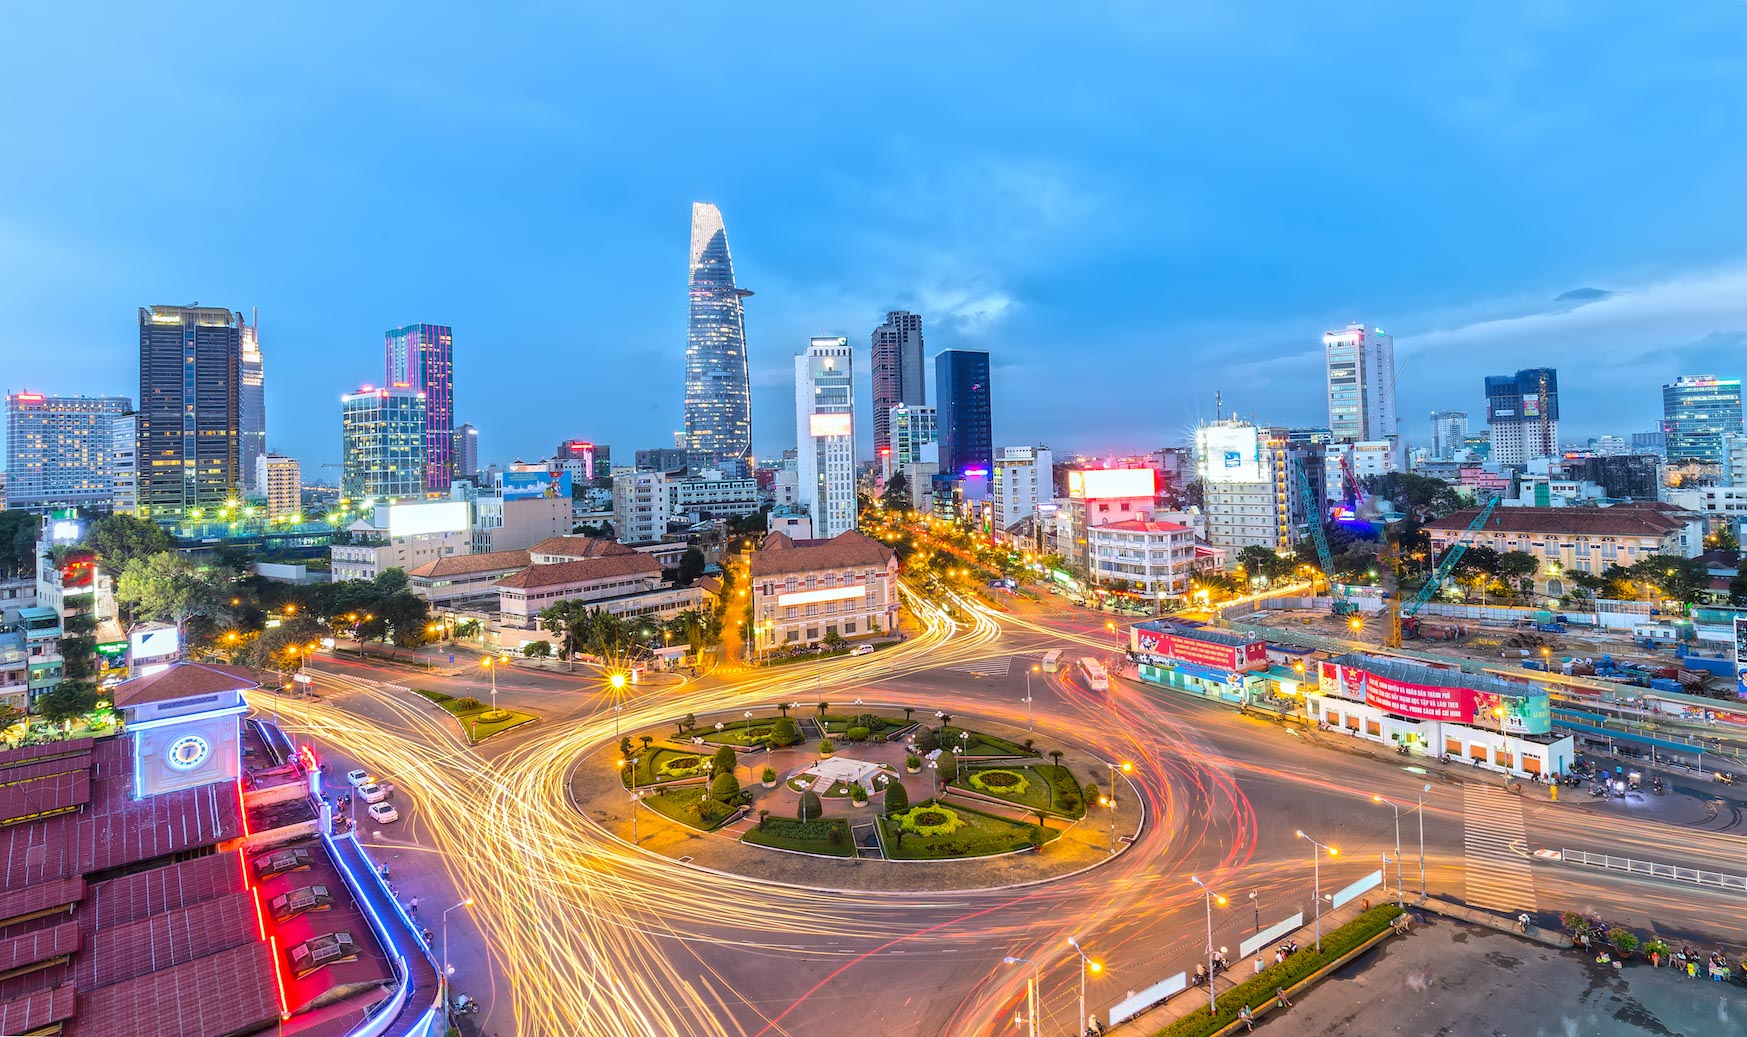 Vietnam is currently classified as a Frontier Market by Morgen Stanley Composite Index, but is slowly shifting towards Emerging Market status which can potentially attract more foreign investment. 